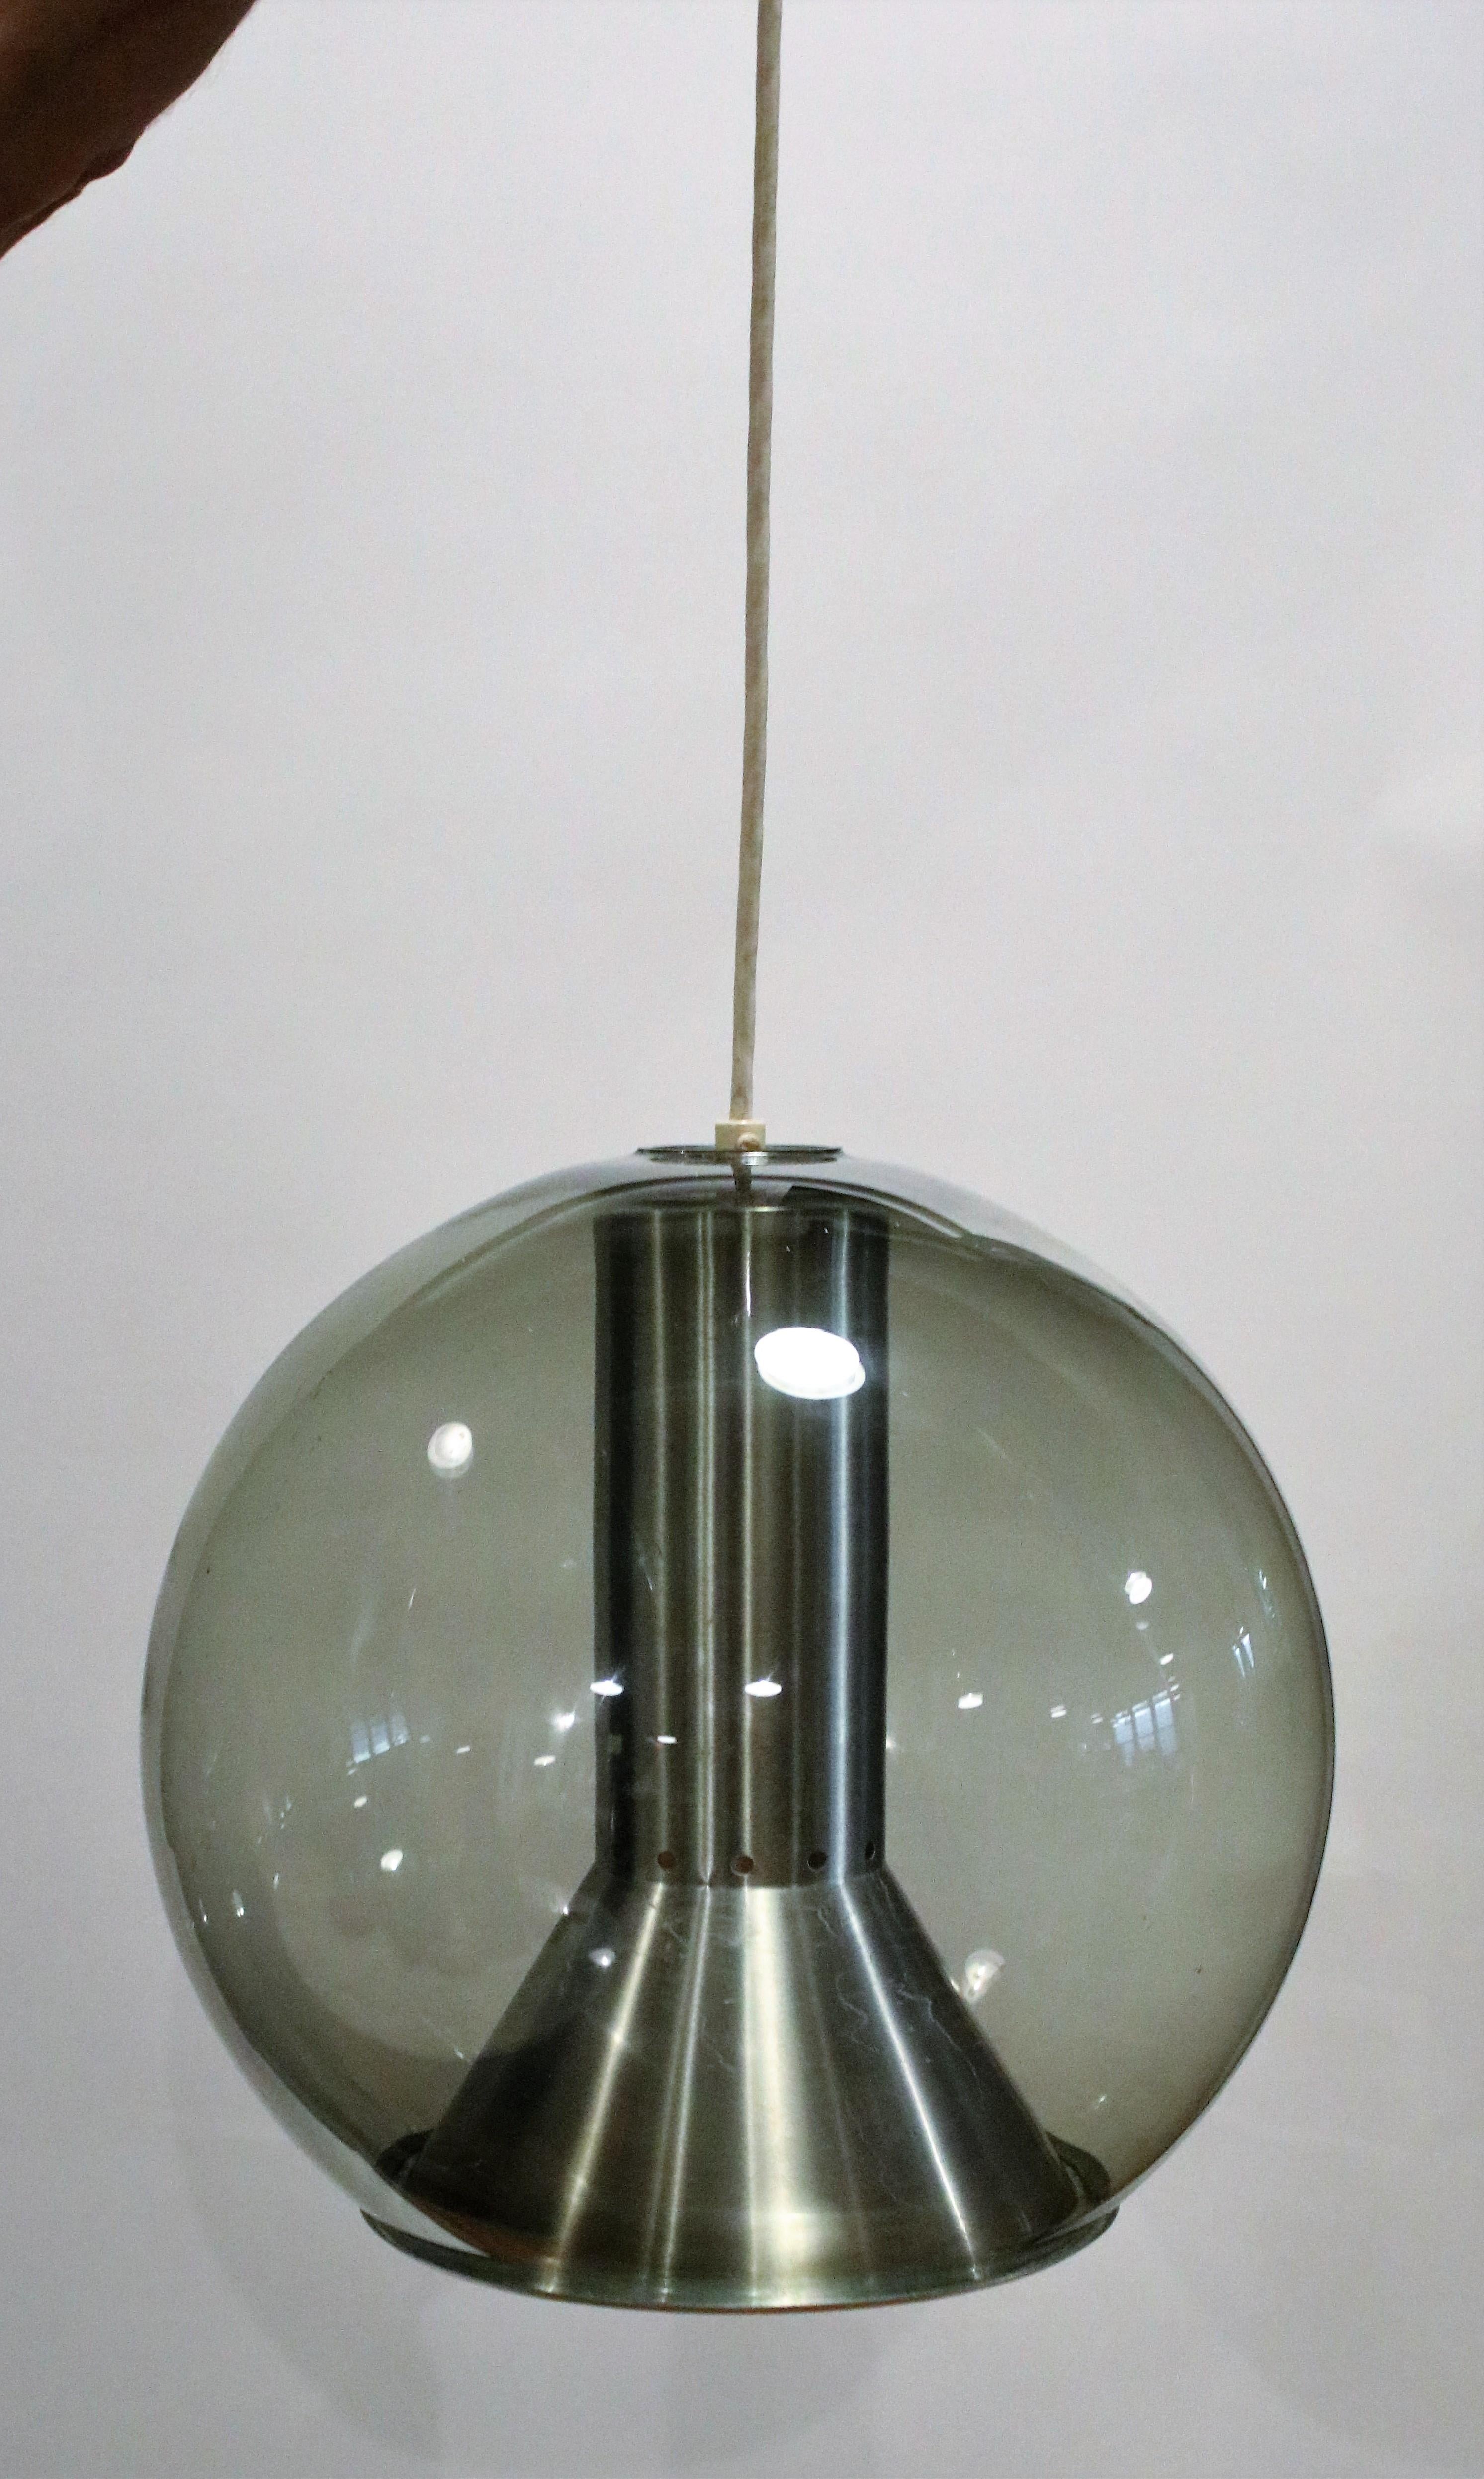 Smoked glass model B 1040-20 globe ceiling lamp by Franck Ligtelijn for RAAK, Amsterdam 1960s, wired and working.